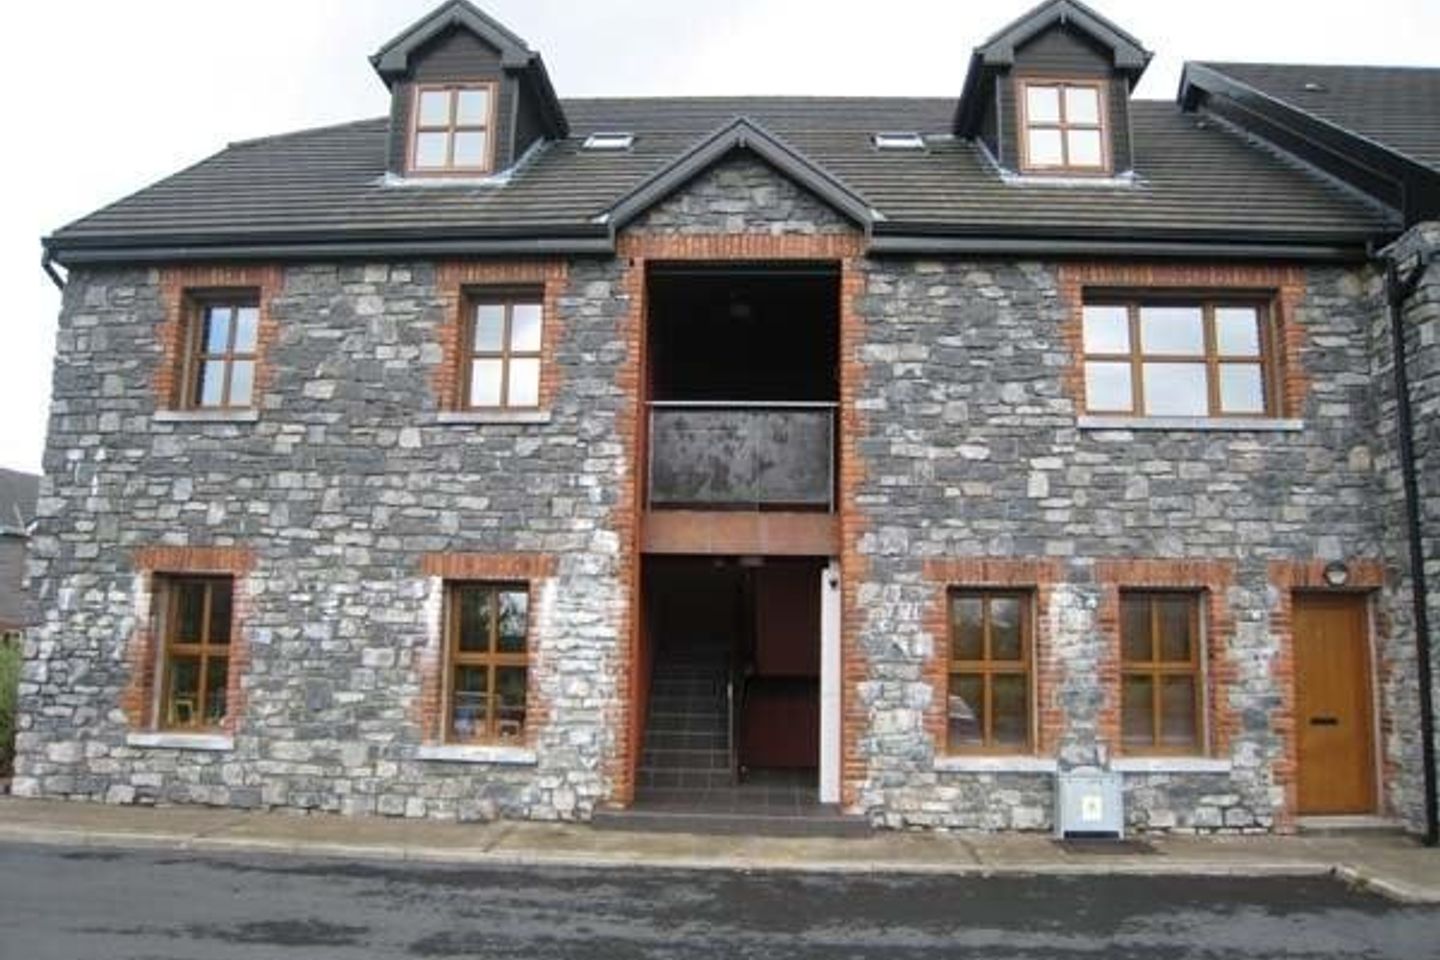 Apartment 5, Carrowmanagh Park, Oughterard, Co. Galway, H91F1W4